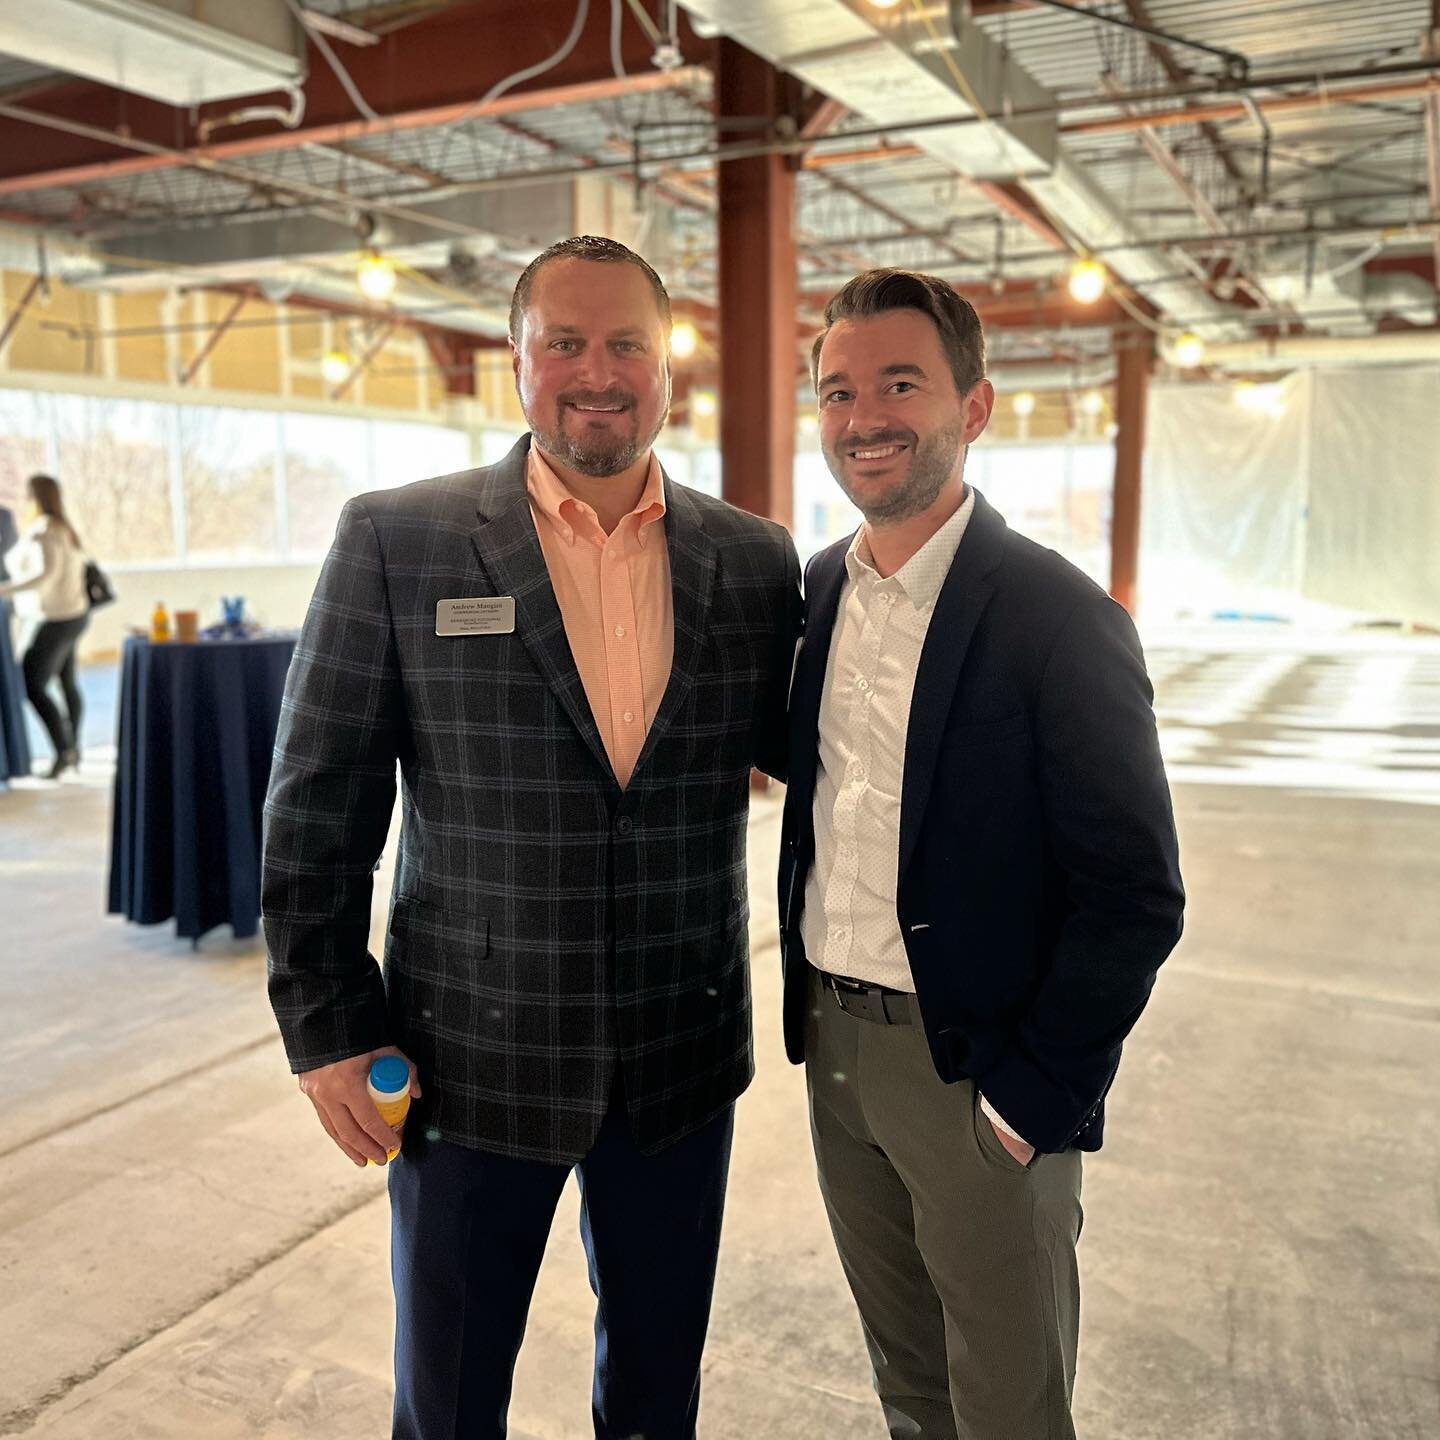 CIREB meeting at 3 Winners Circle in Albany, NY. The future home of our commercial real estate division. #berkshirehathawayhomeservices #commercialrealestate #commercial #realtors